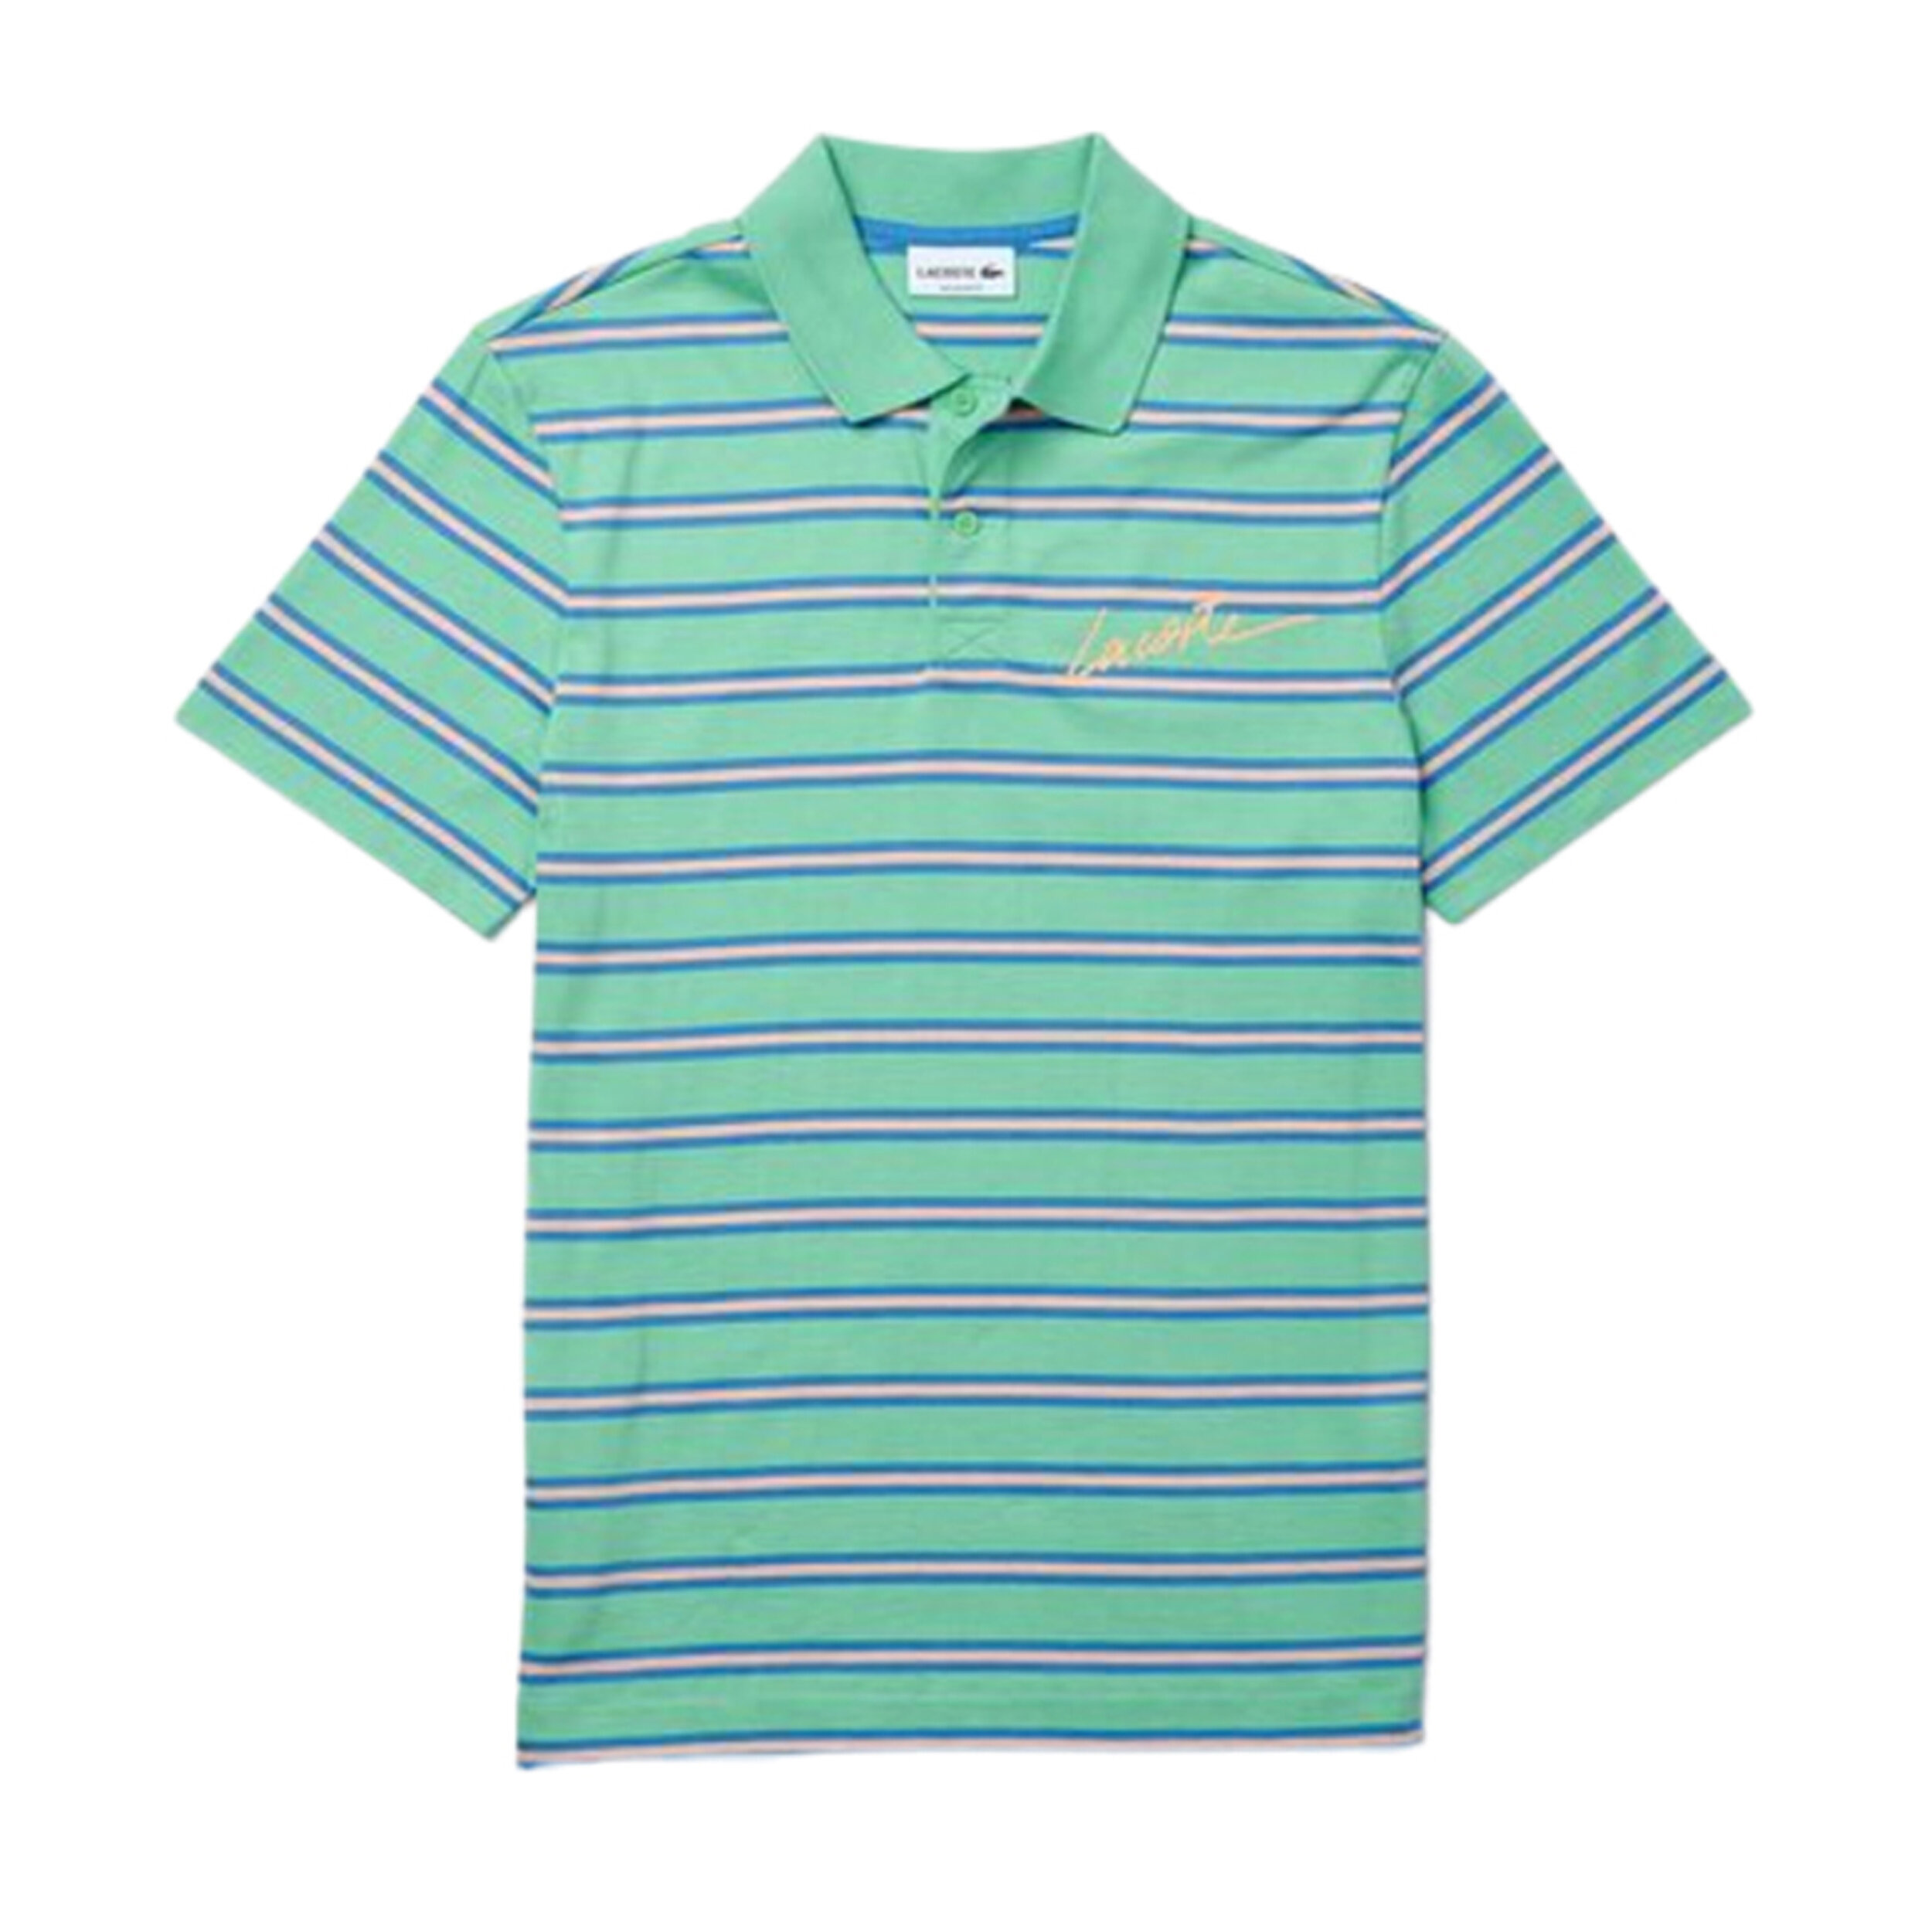  Mens Striped Printed Lettering Cotton Polo Shirt Lacoste P5,250 